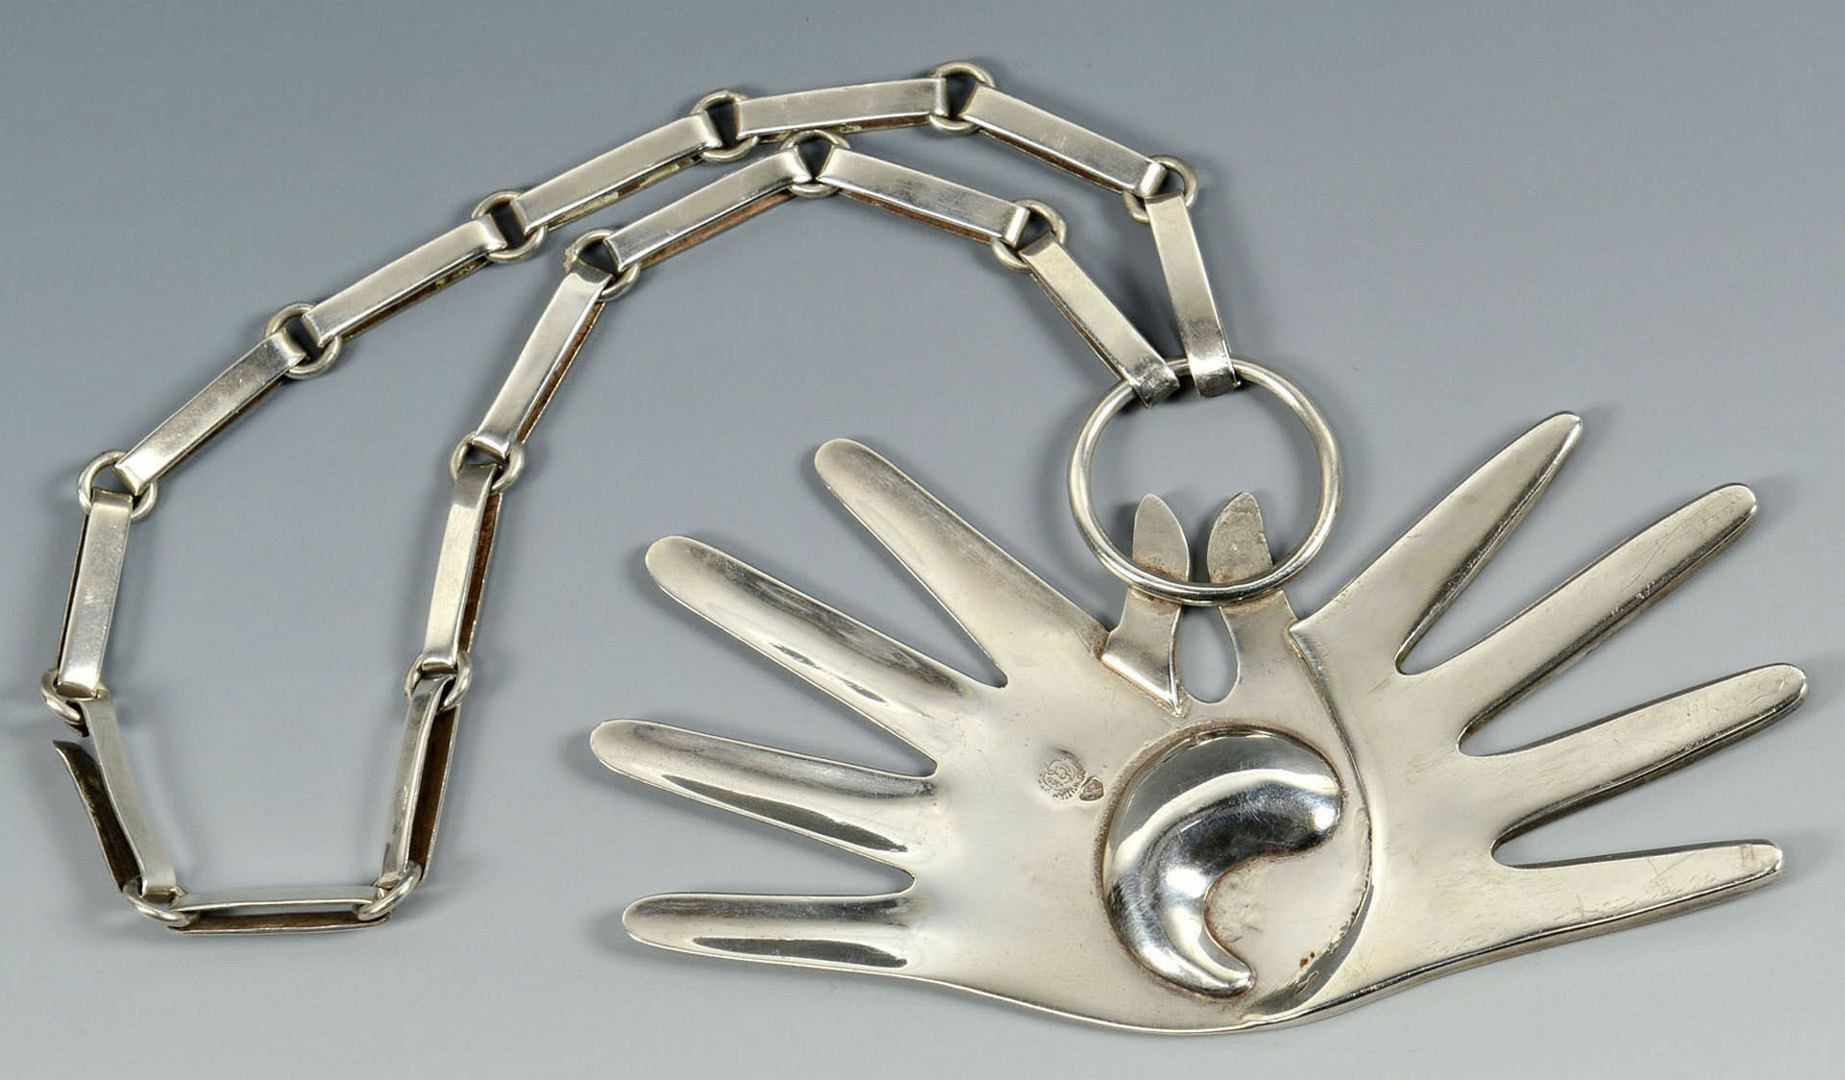 Lot 62: Spratling Mexico Silver and Faux Tortoise Necklace